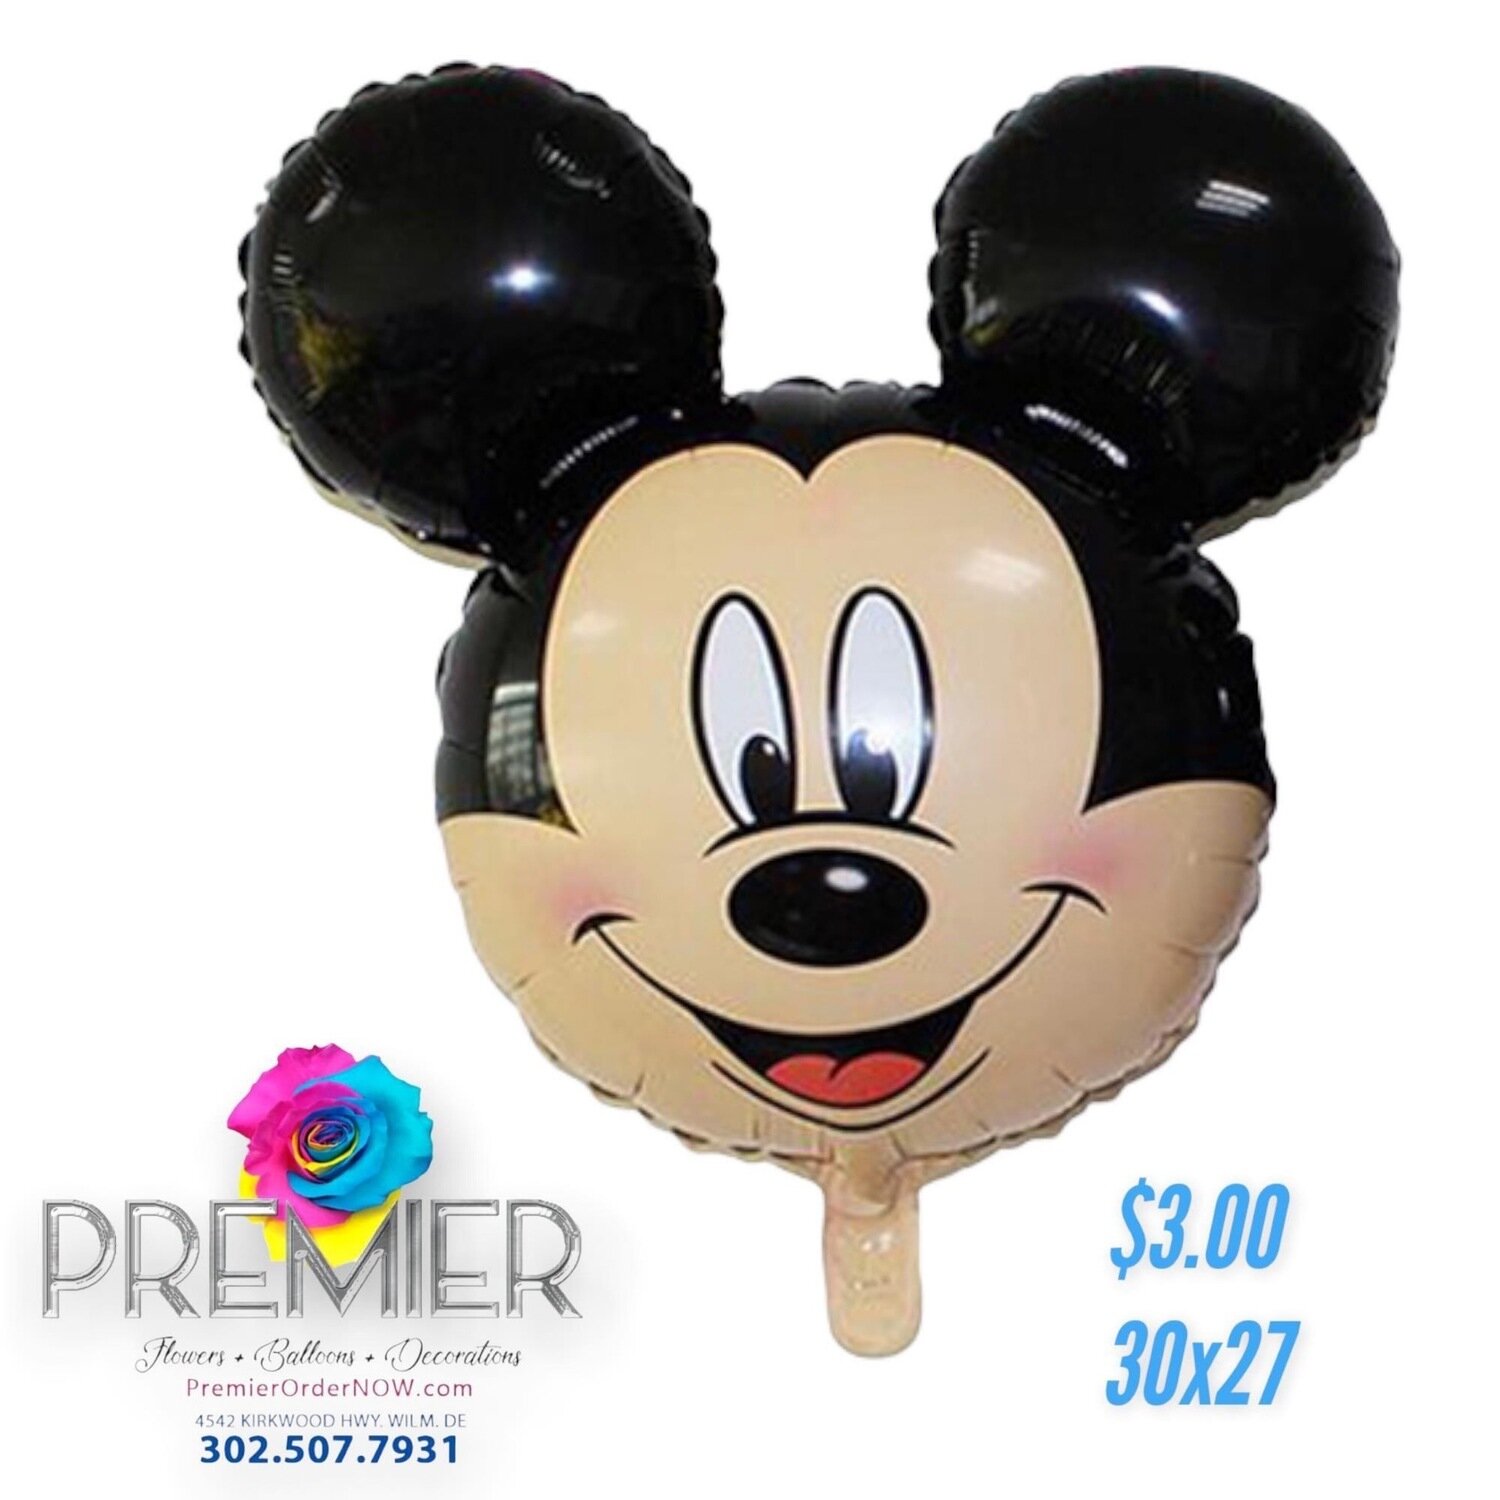 Mickey Mouse Face Foil Balloon 30x27", How do you want the balloon?: Deflated